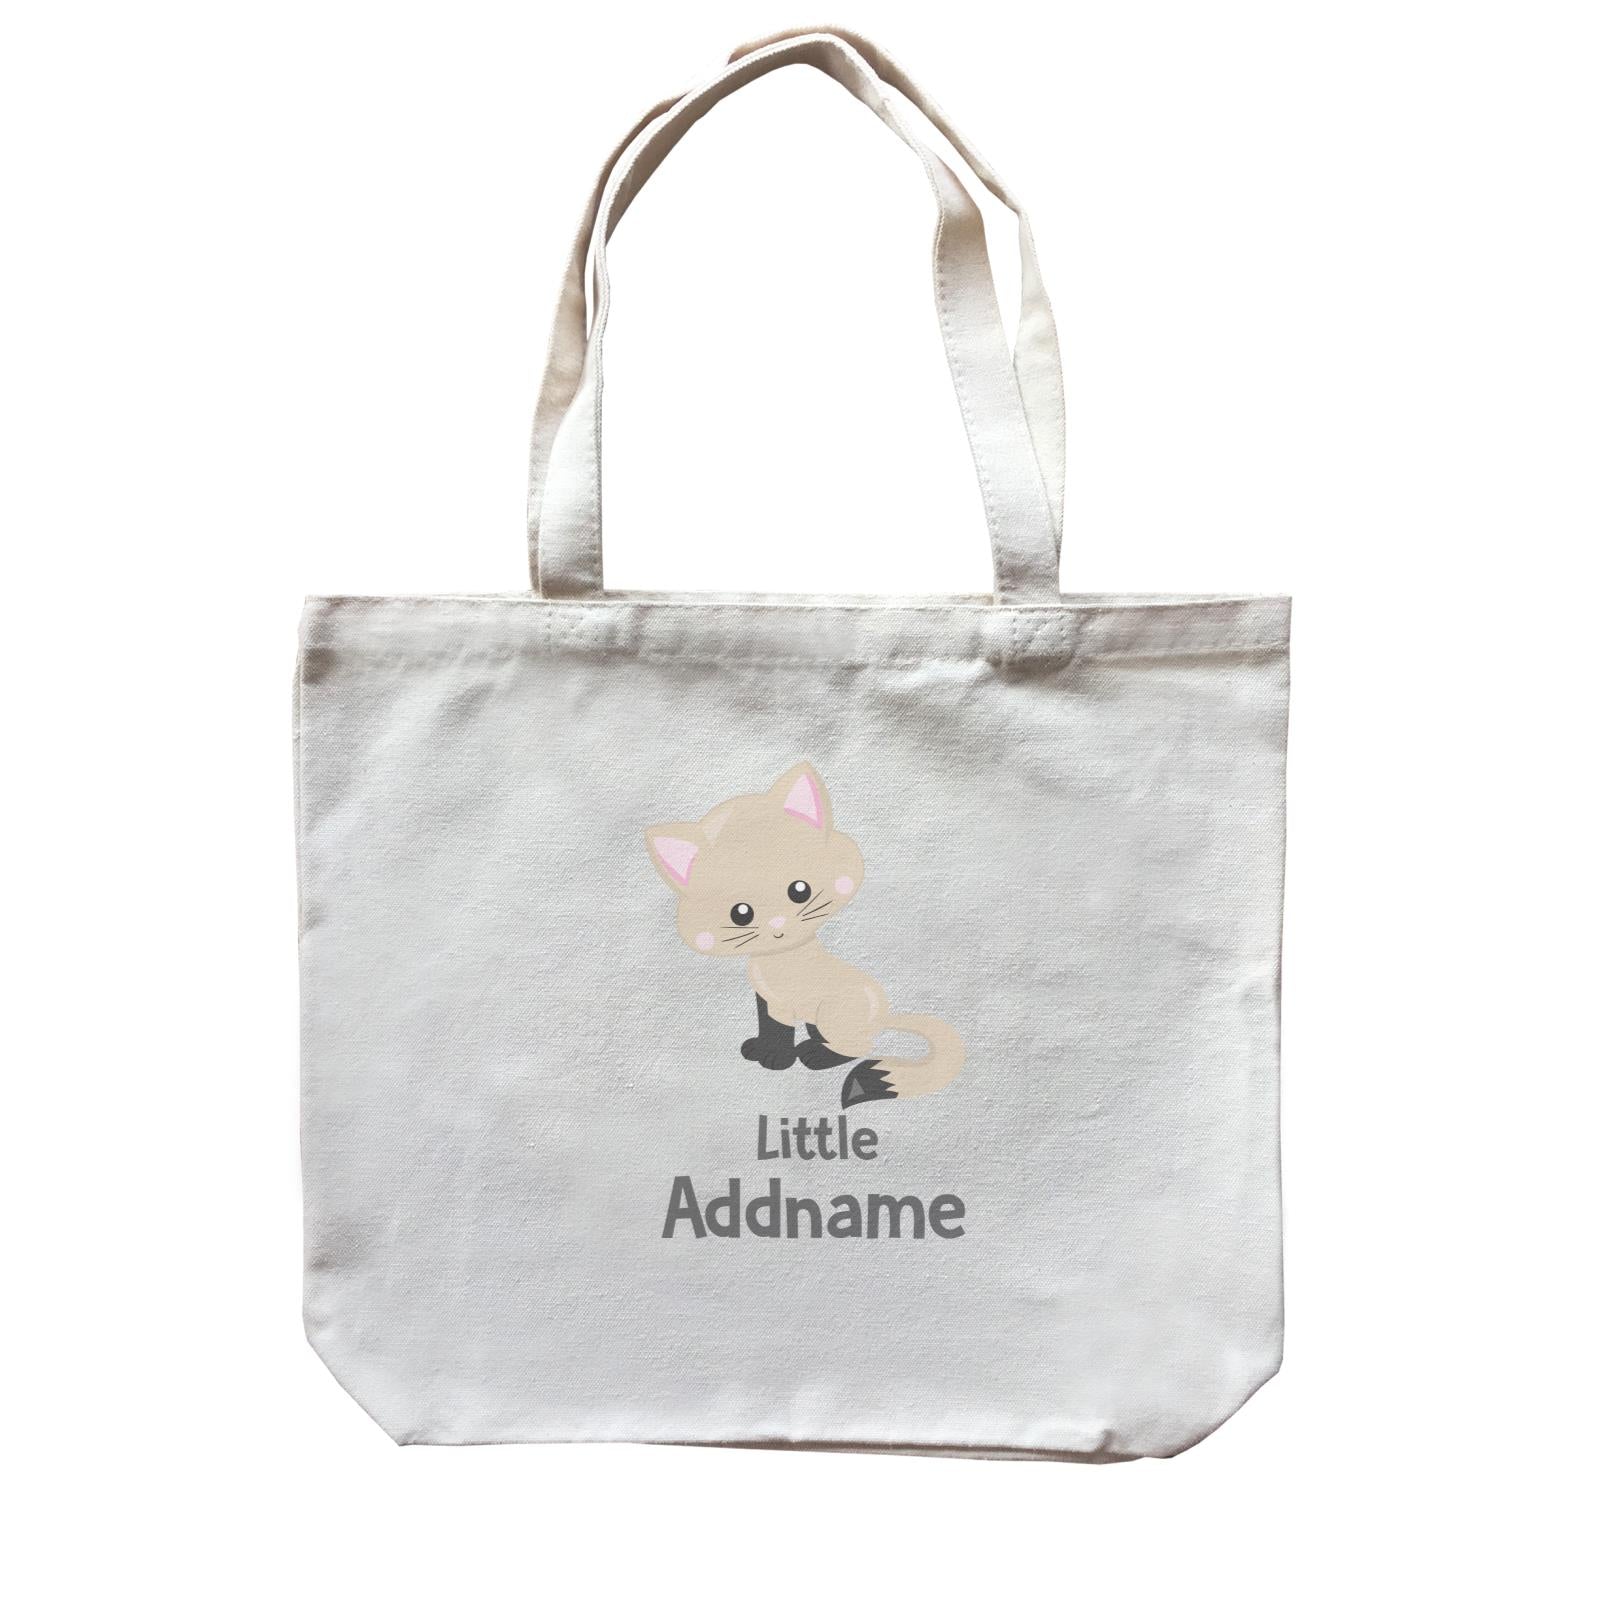 Adorable Cats Light Brown Cat with Black Legs Little Addname Canvas Bag